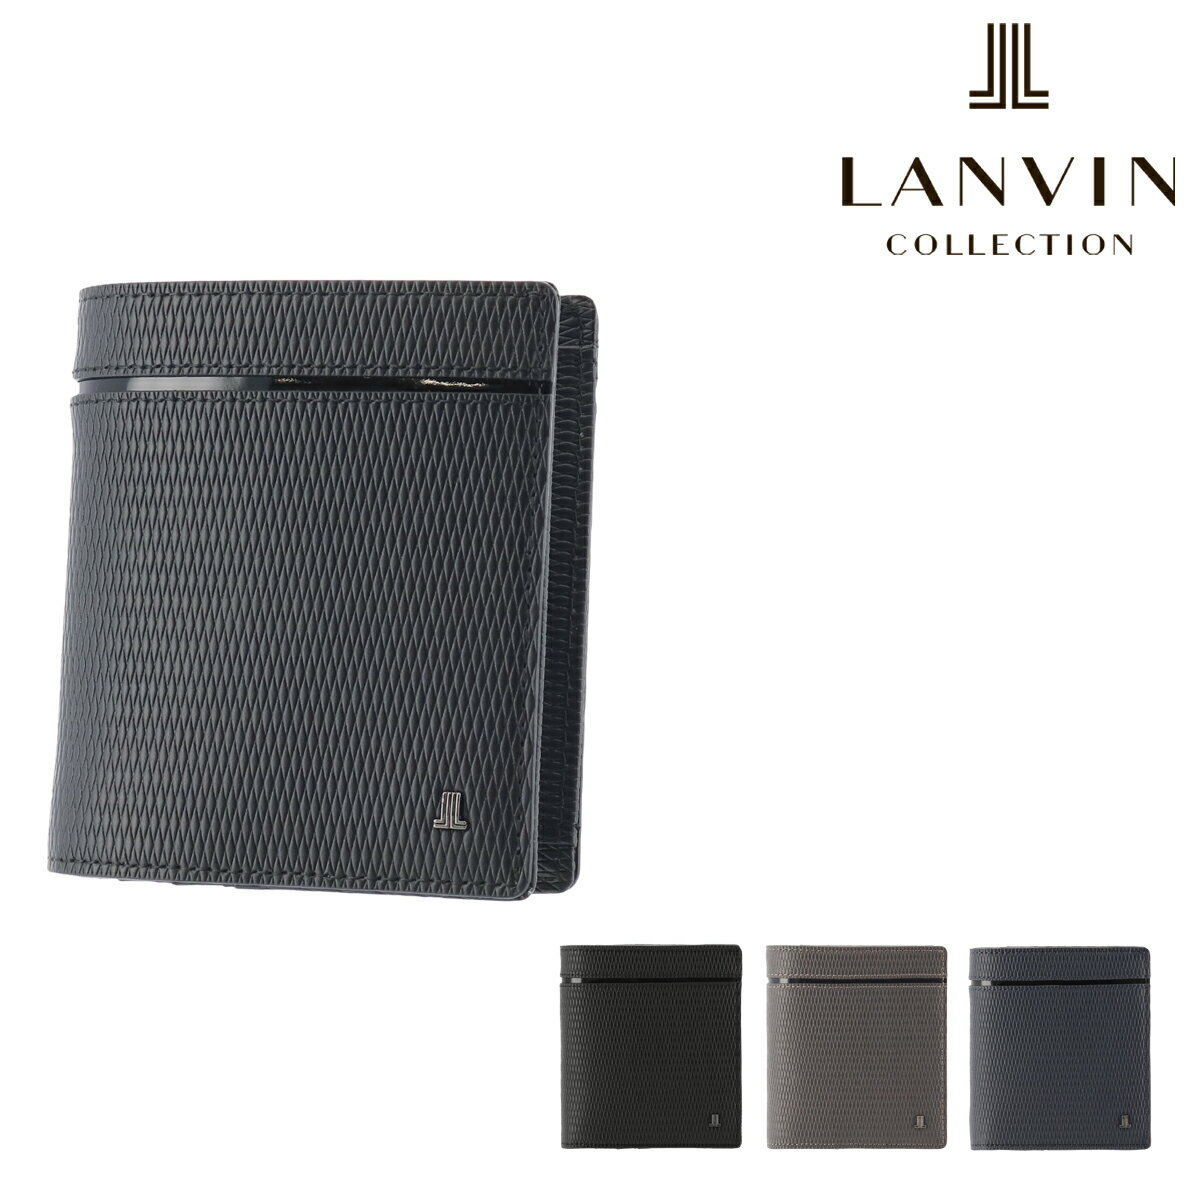 Х󥳥쥯 ߥ˺ ޤ ѥ 쥶ӥ͡ ܳ  JLMW9HS3 LANVIN COLLECTION |  쥶